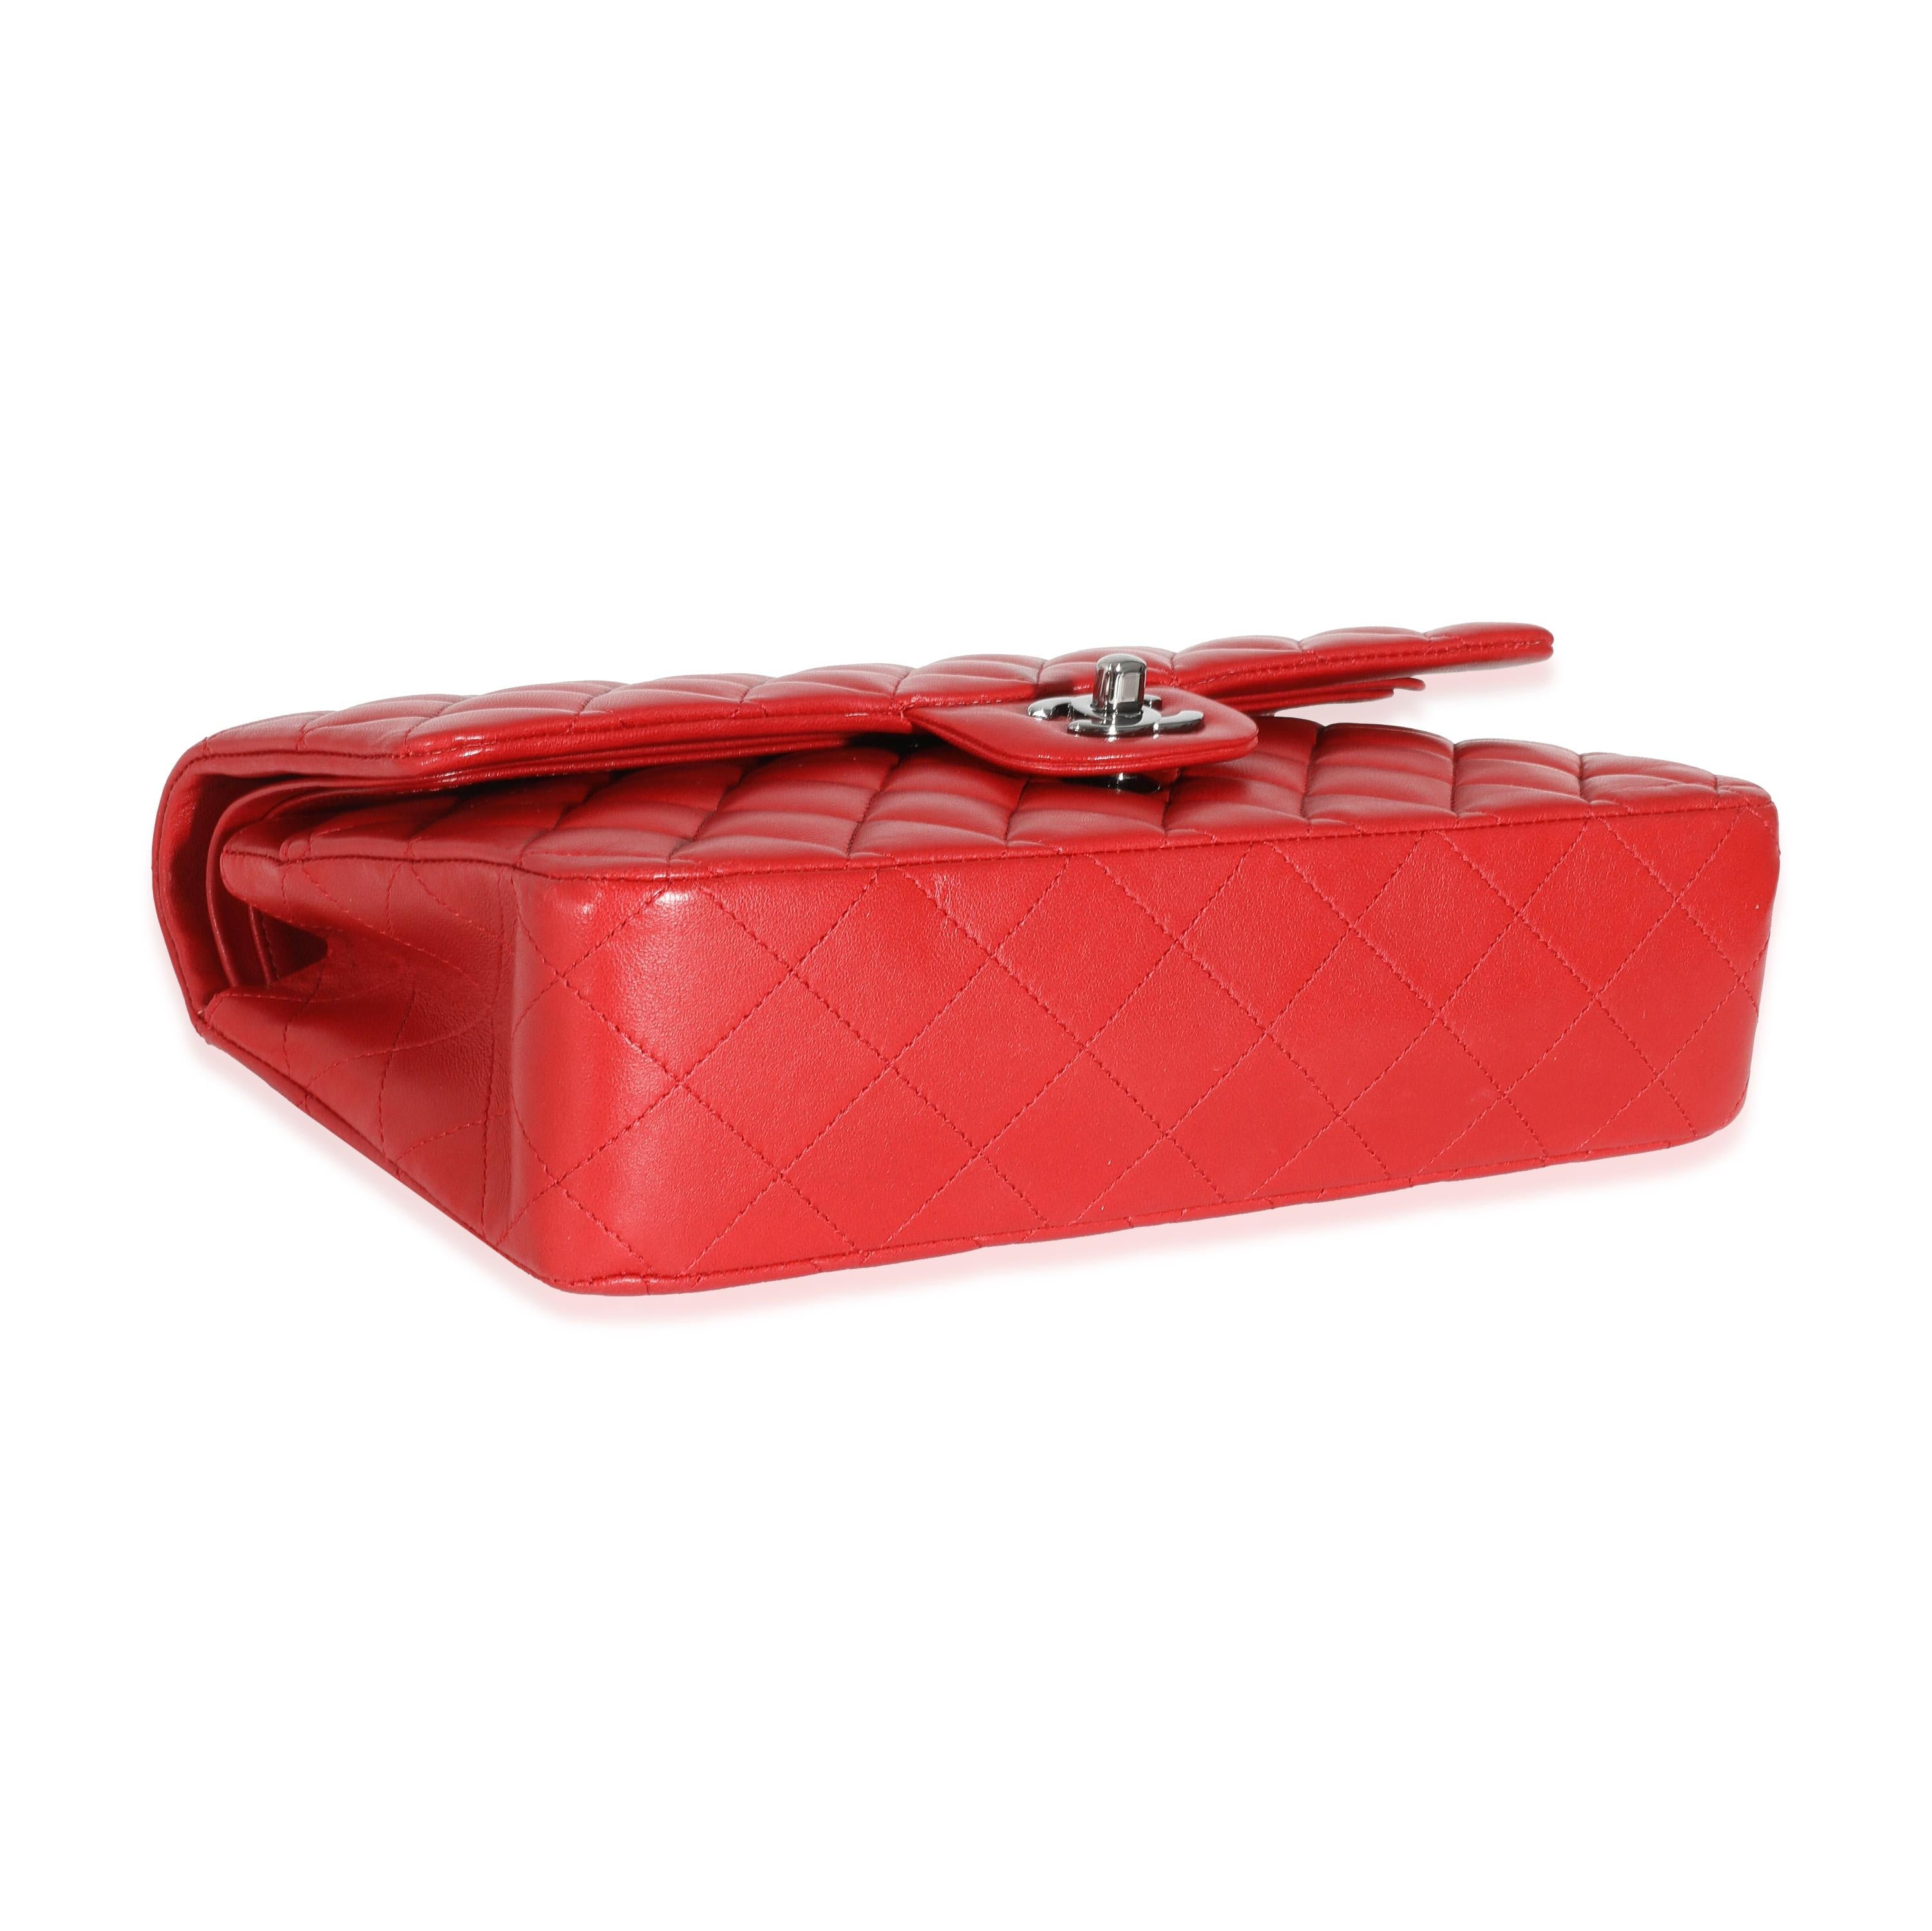 Listing Title: Chanel Red Lambskin Medium Classic Double Flap Bag
SKU: 132025
MSRP: 10200.00
Condition: Pre-owned 
Condition Description: A timeless classic that never goes out of style, the flap bag from Chanel dates back to 1955 and has seen a